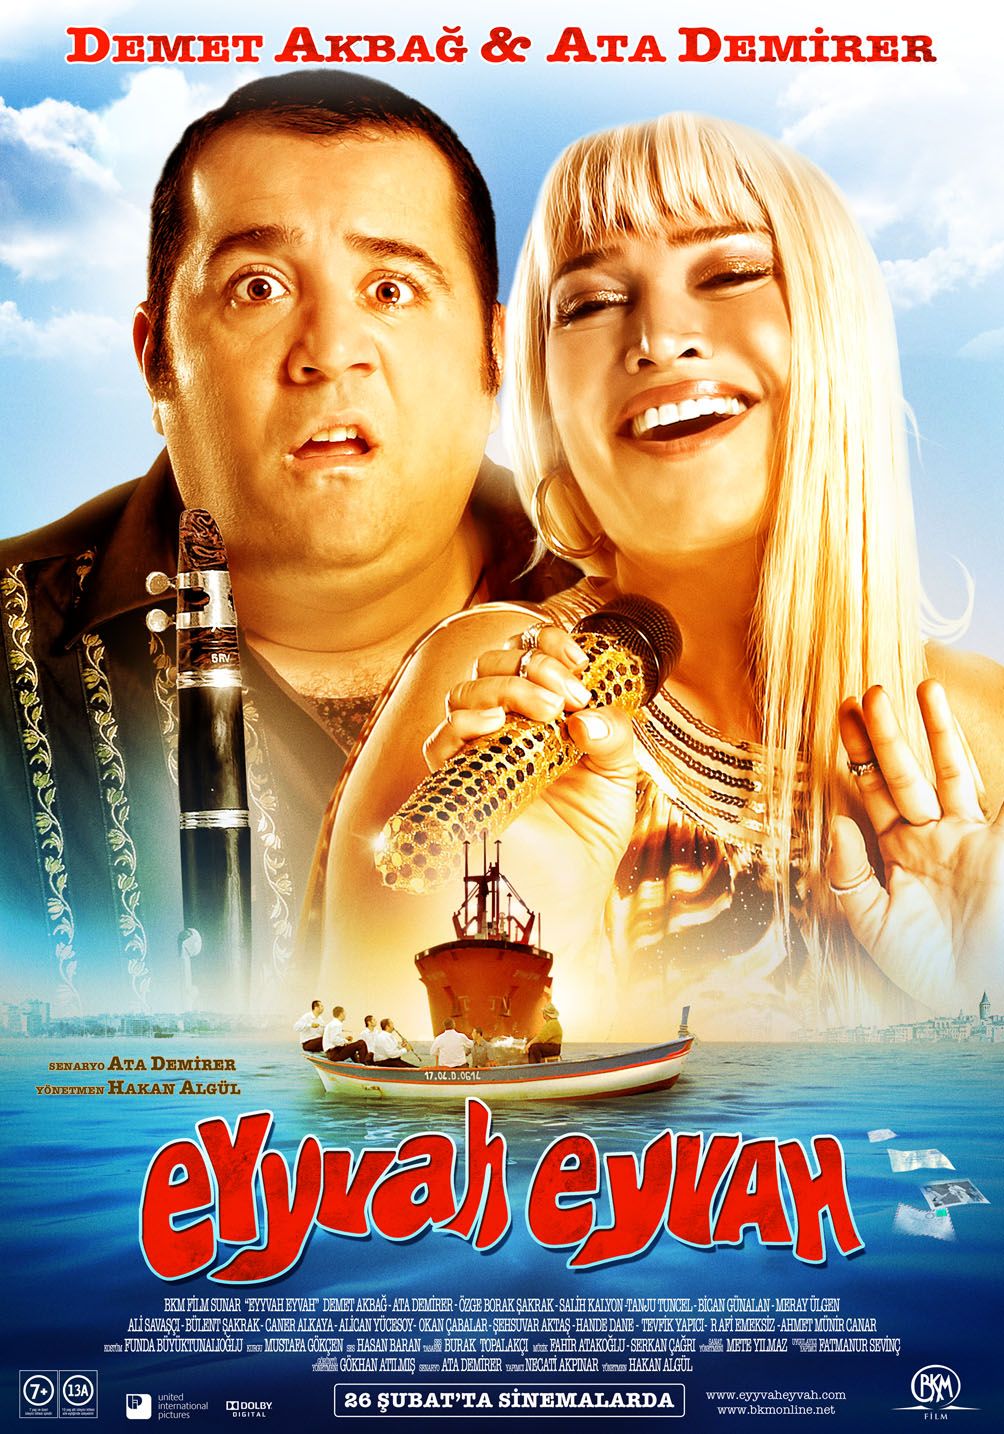 Extra Large Movie Poster Image for Eyyvah eyvah 